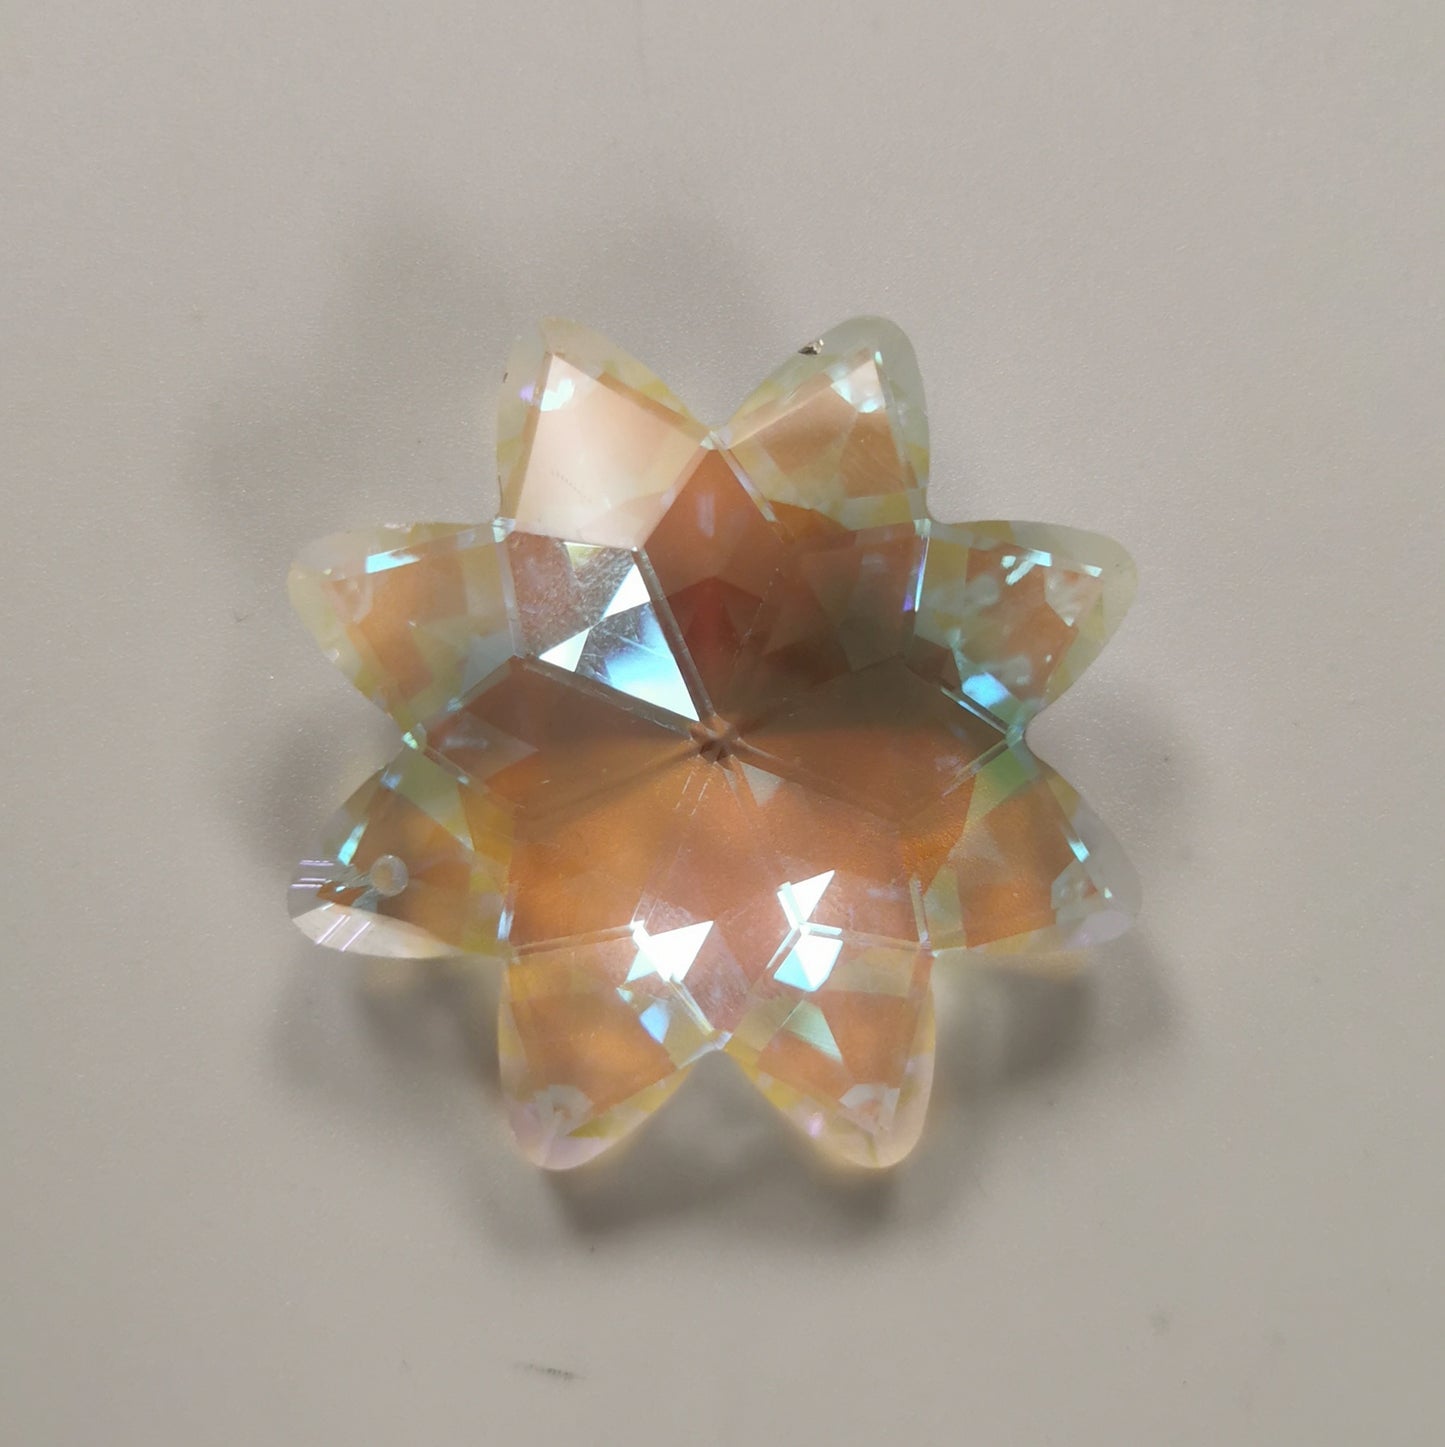 8 Pointed Star Iridescent Prism